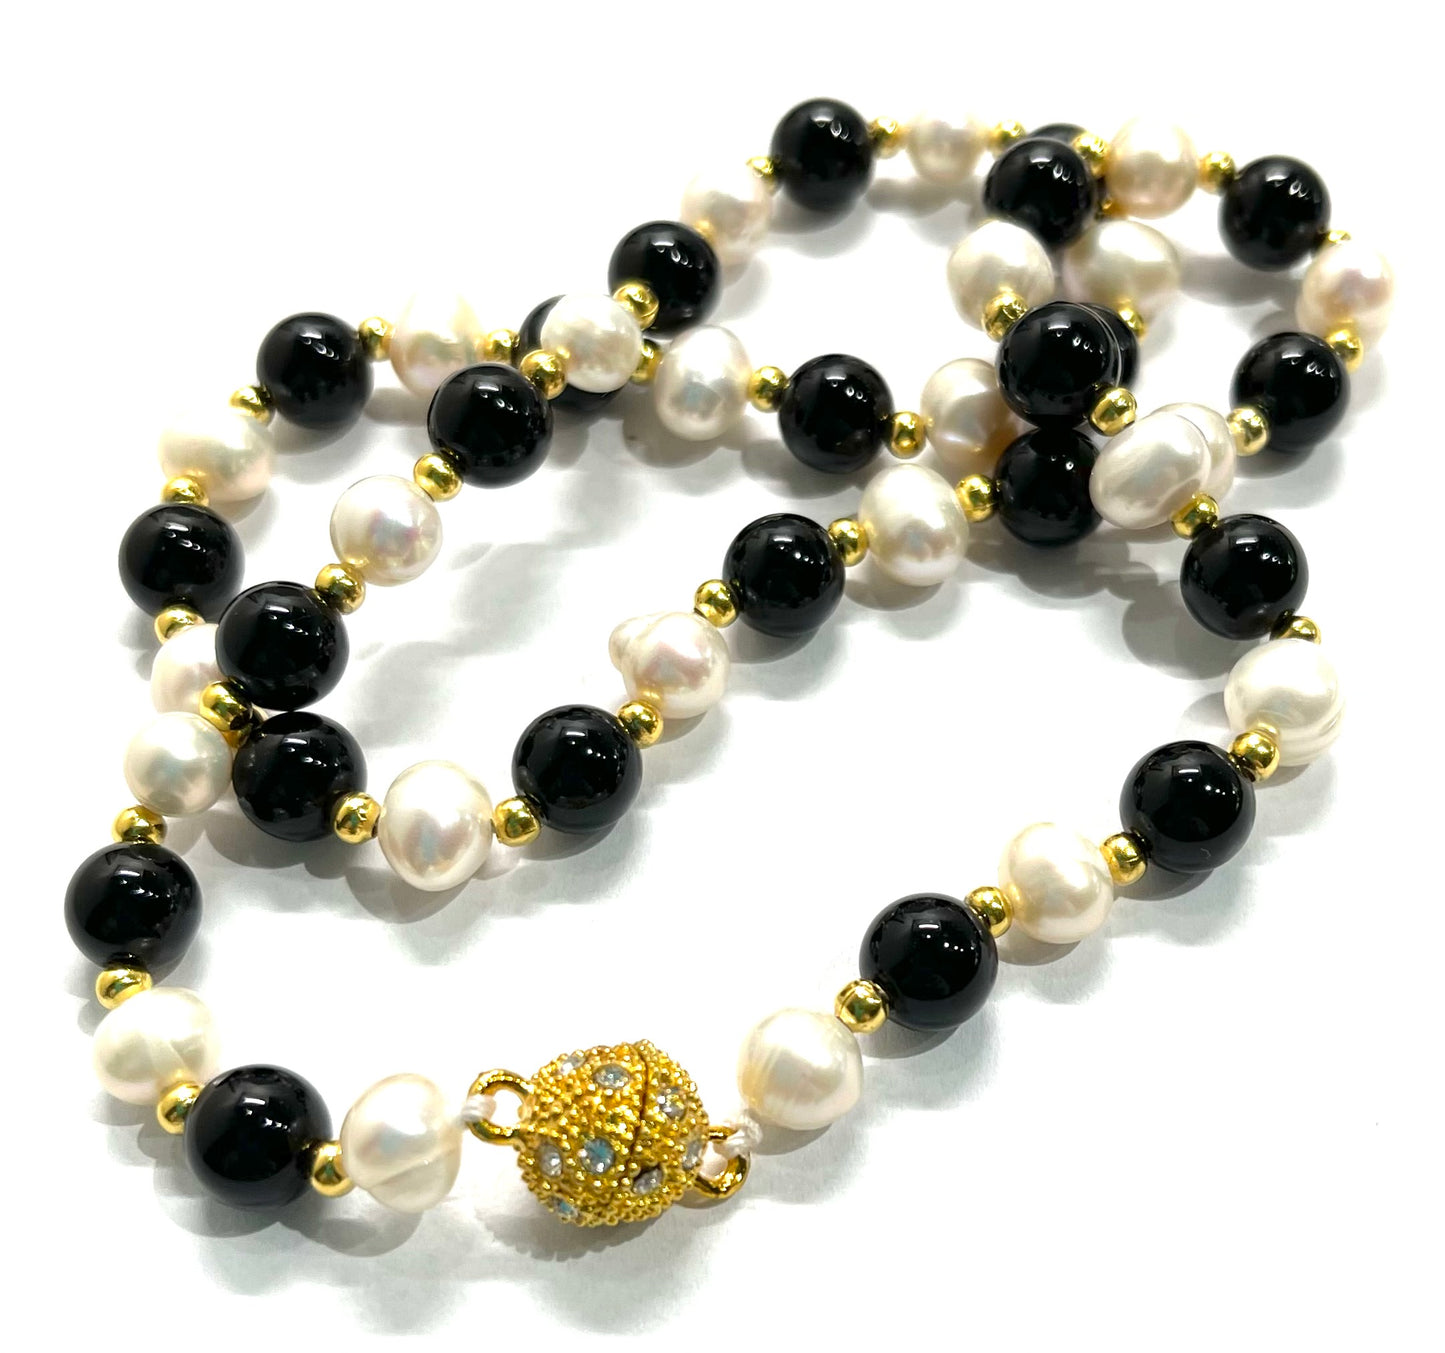 Dainty Black Onyx and Freshwater Pearl Gemstone Necklace 18”